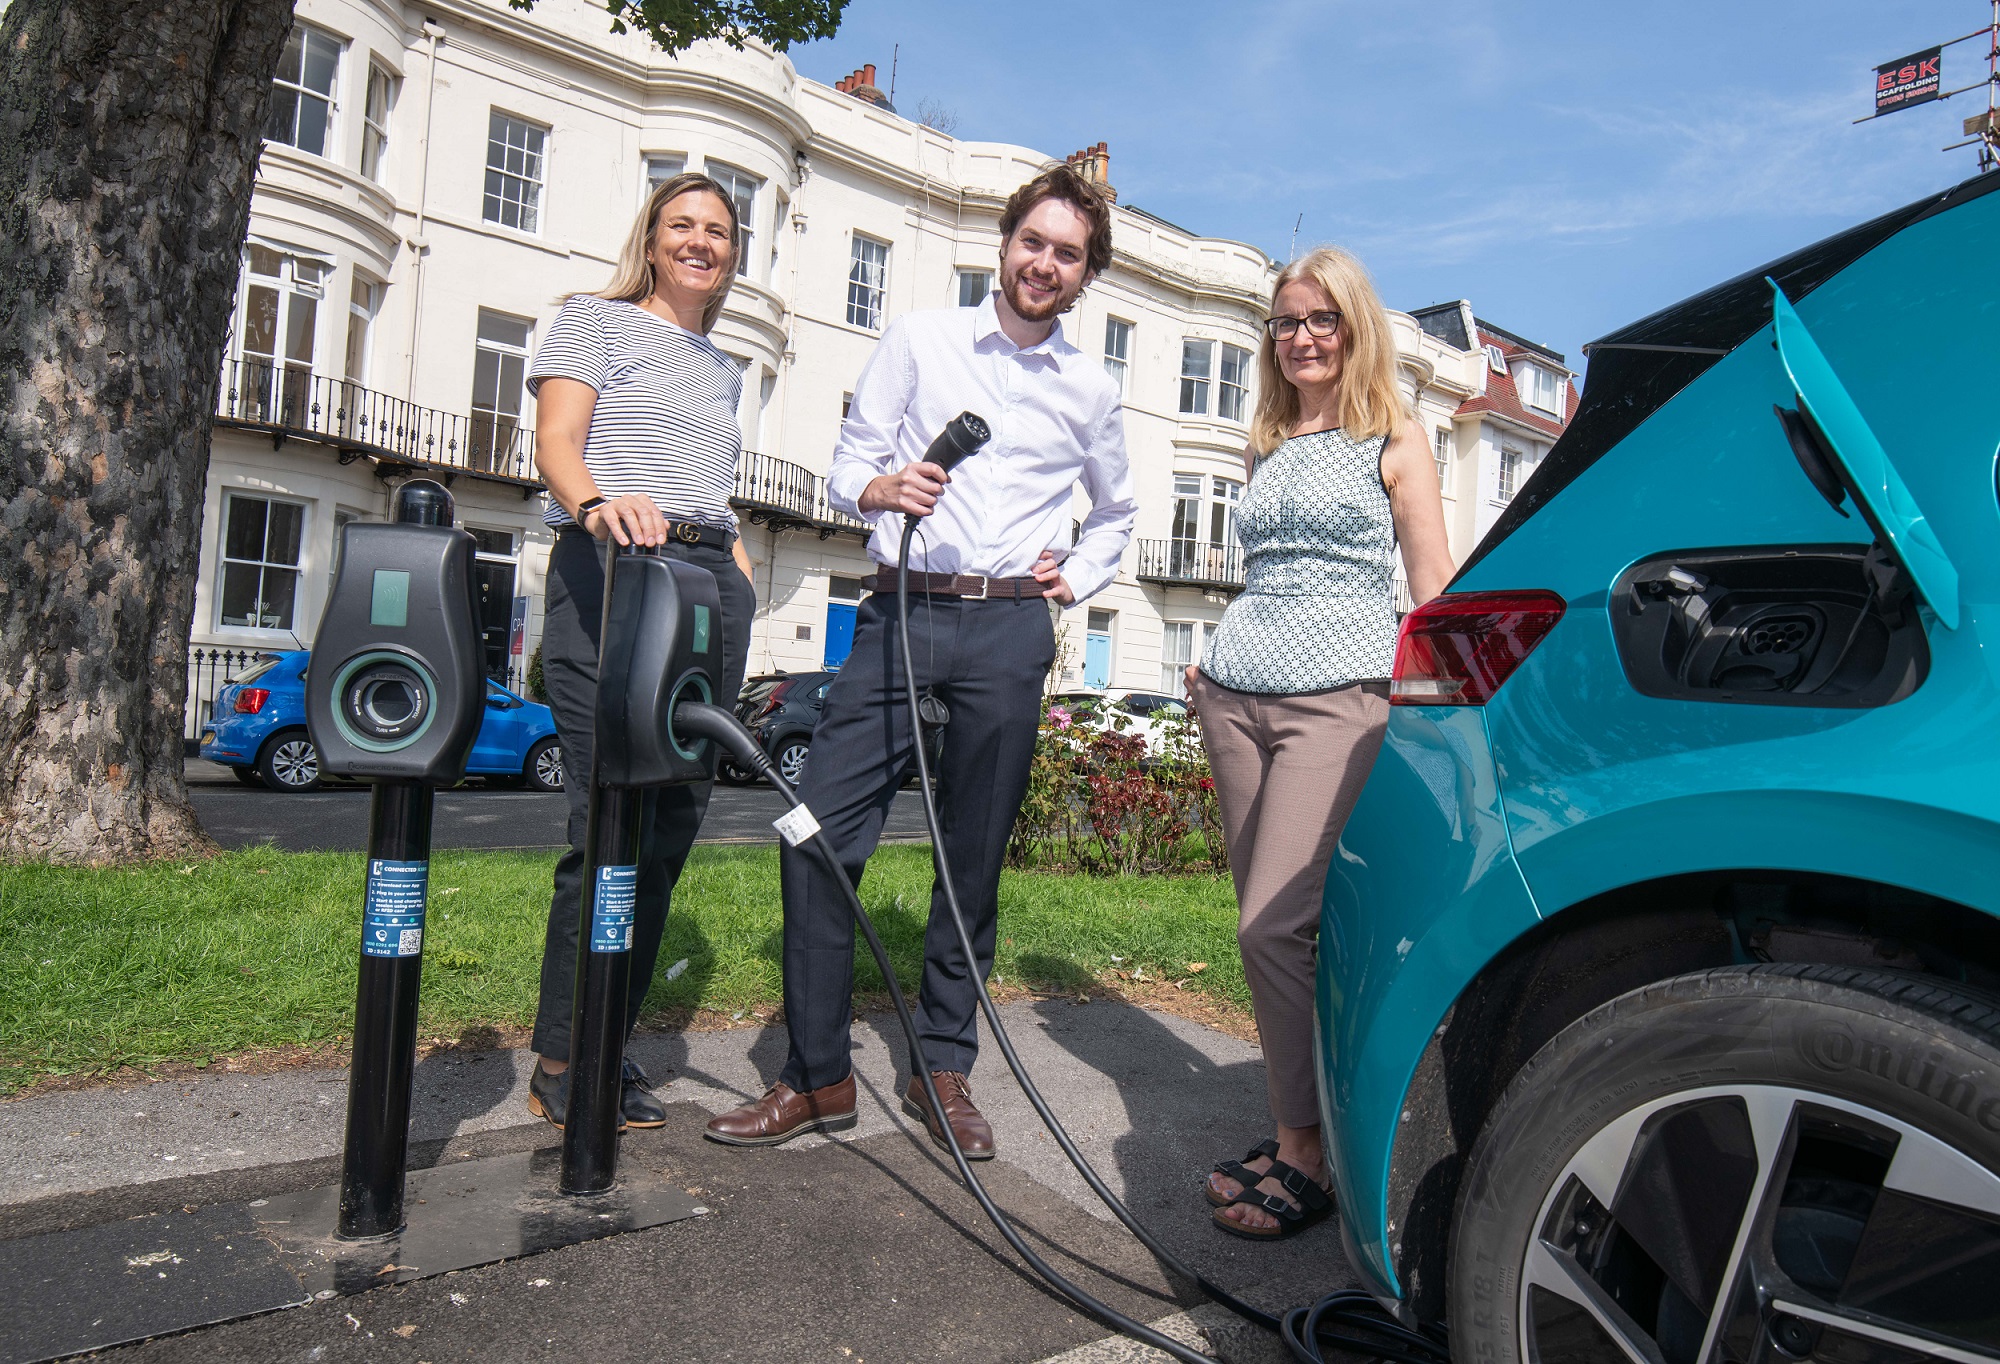 3 people with an electric car and charger